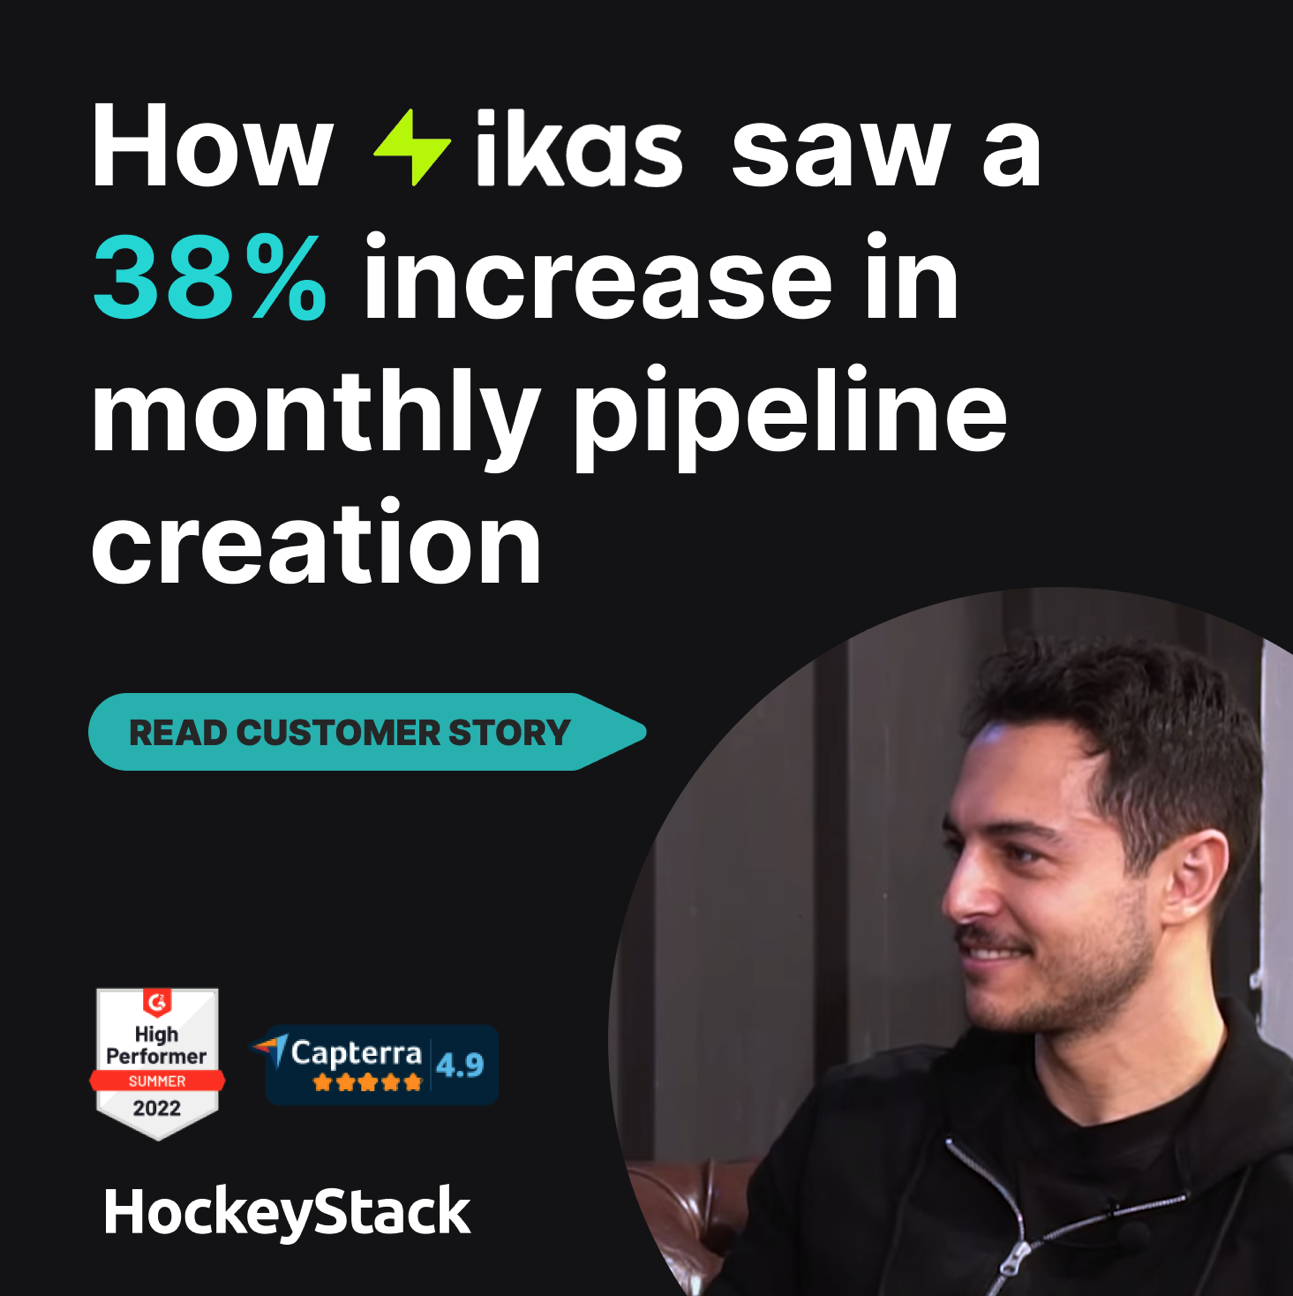 How ikas increased monthly pipeline creation by 38% in a quarter